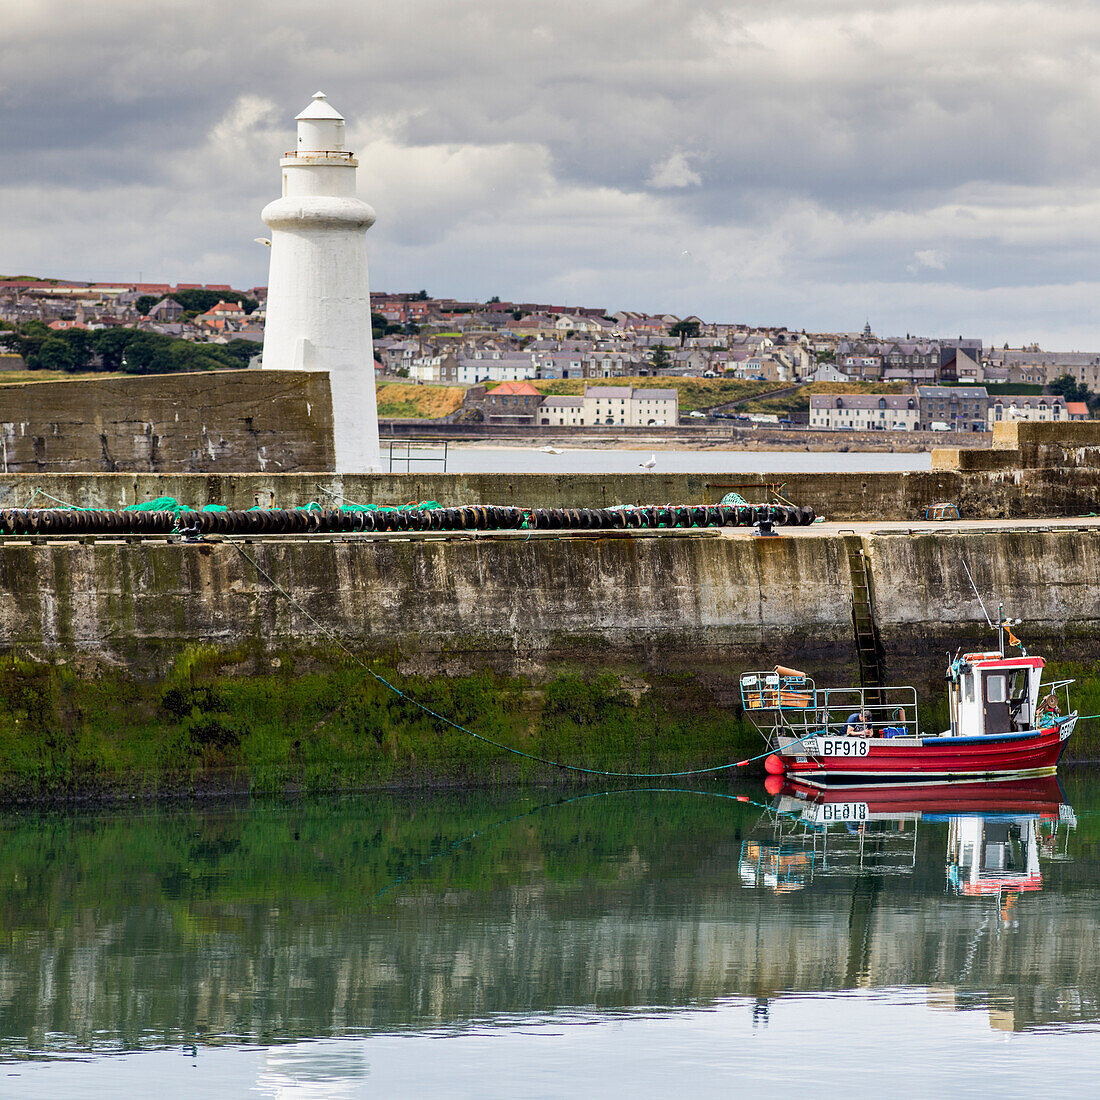 'Fishing boat moored in a tranquil harbour with a white lighthouse and cityscape; Macduff, Aberdeenshire, Scotland'